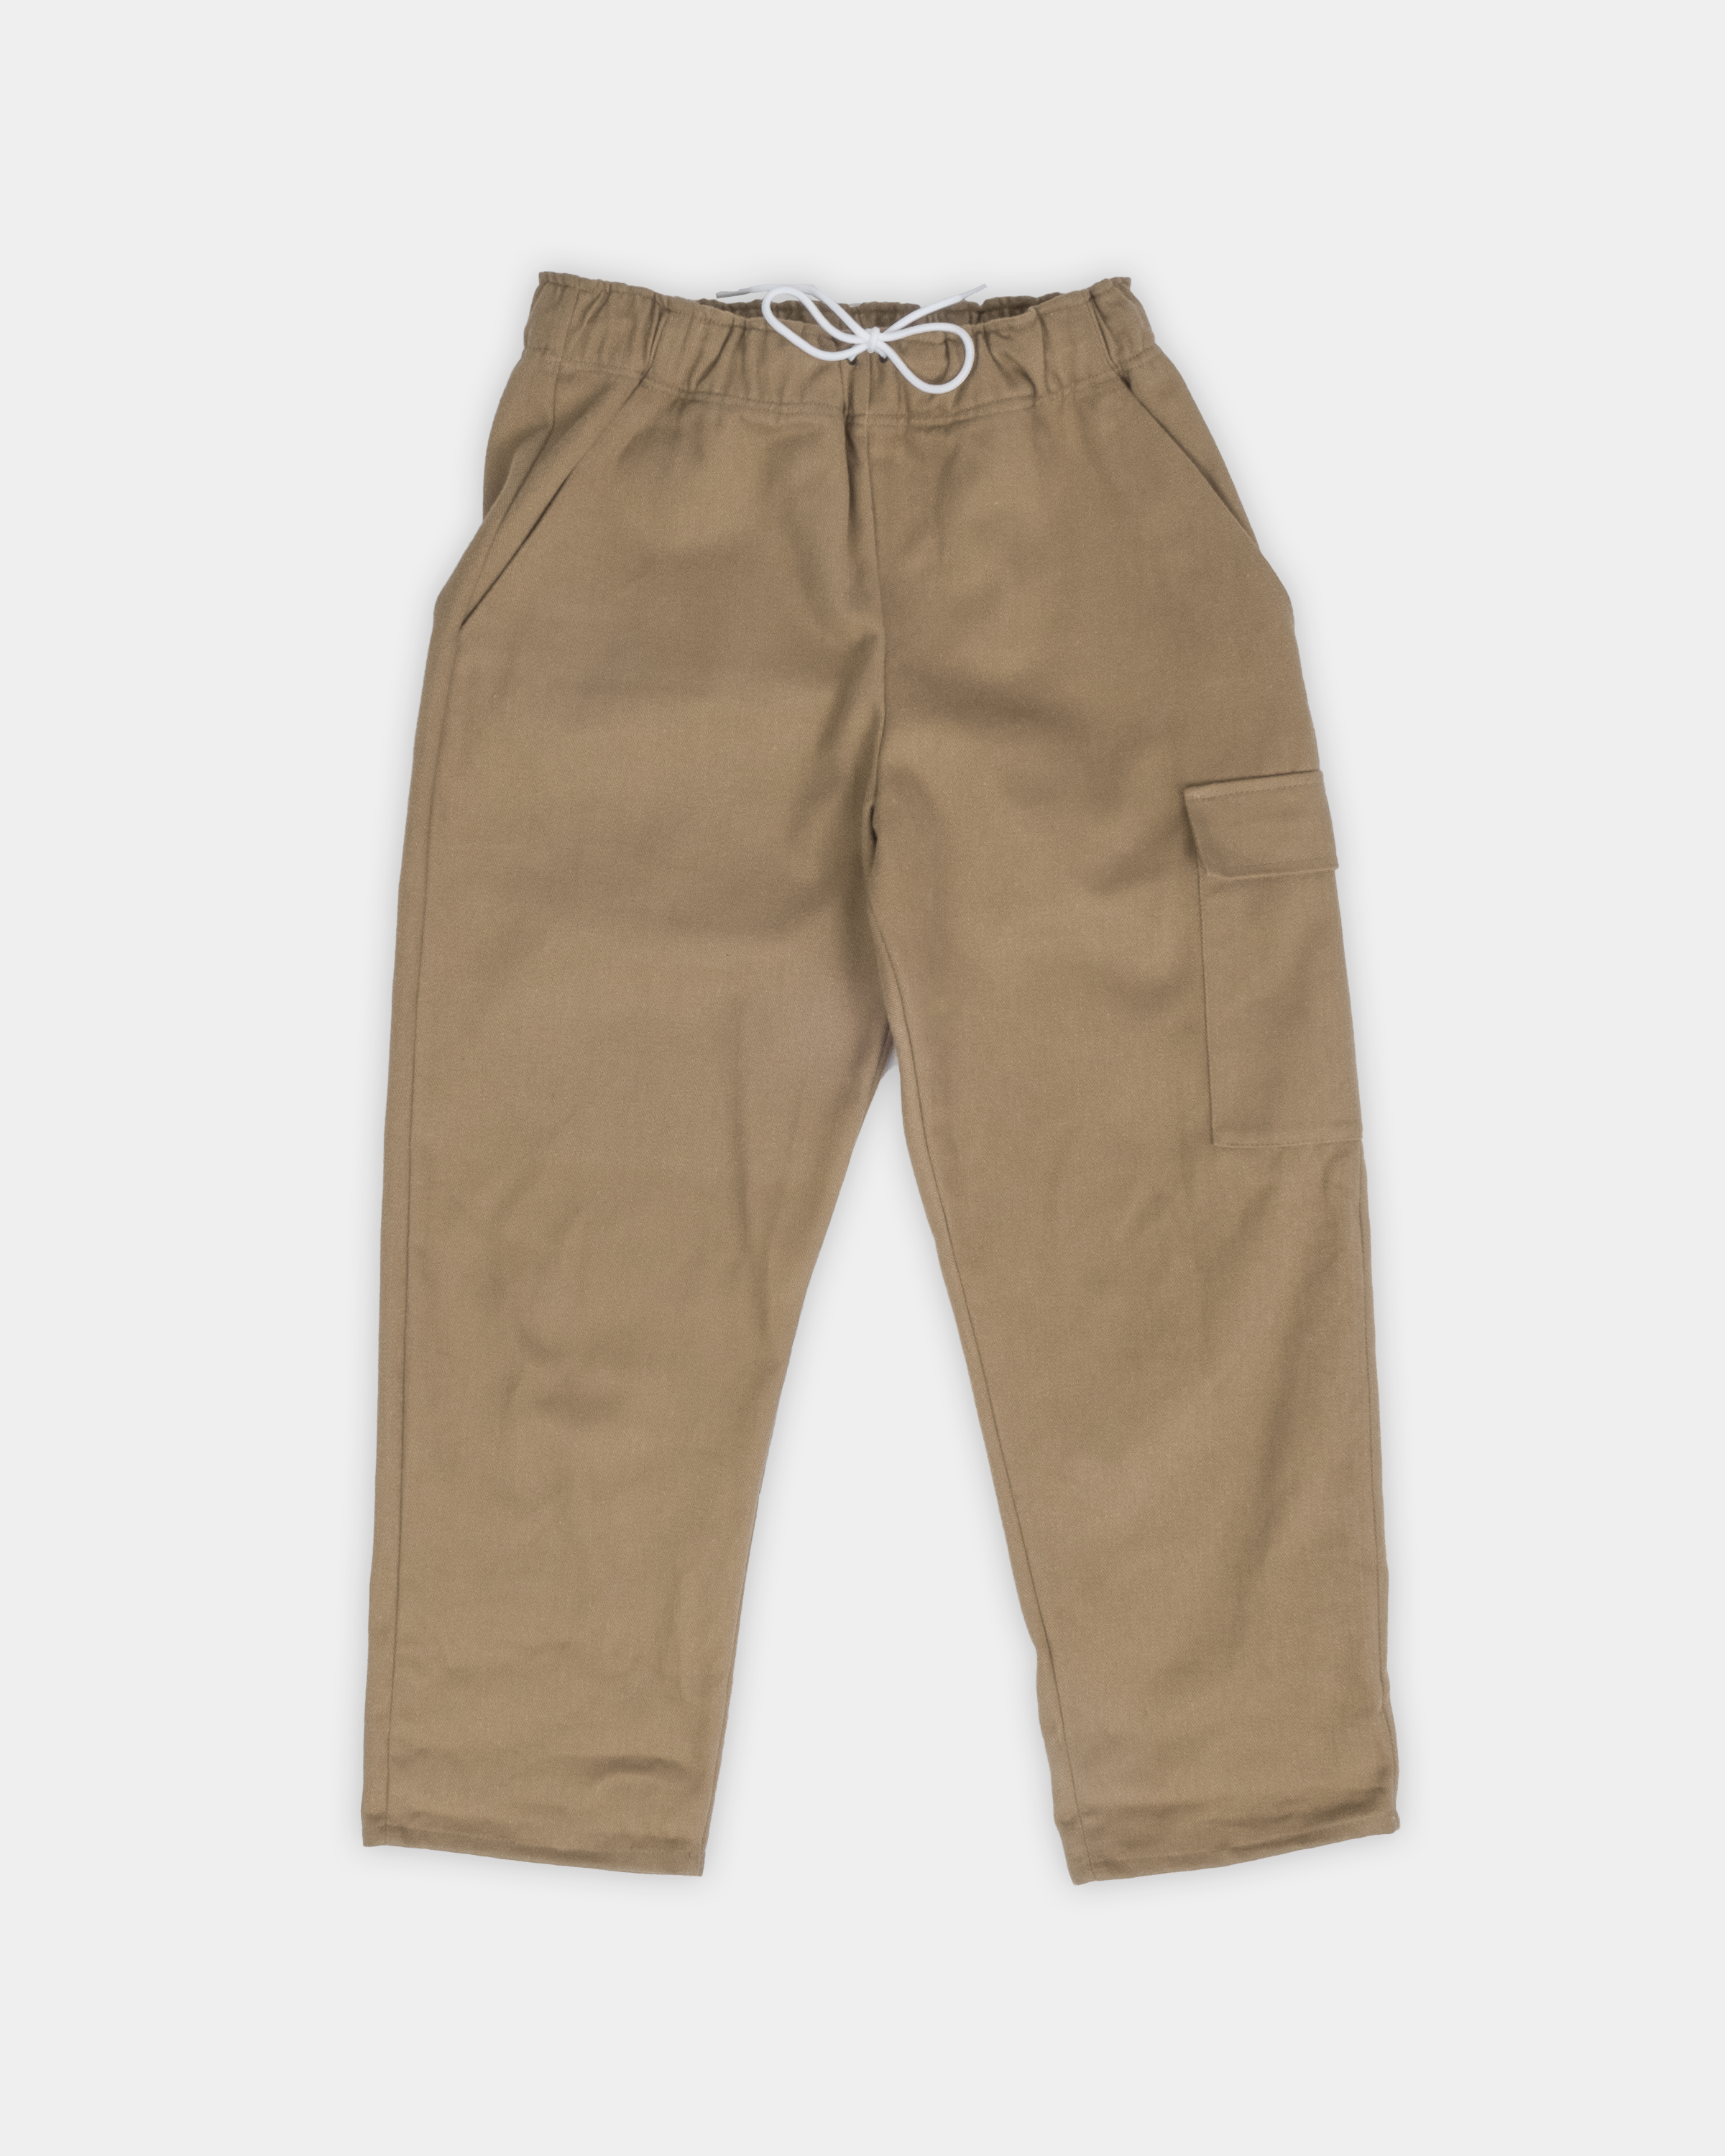 Boothe Cargo Pant - Earth